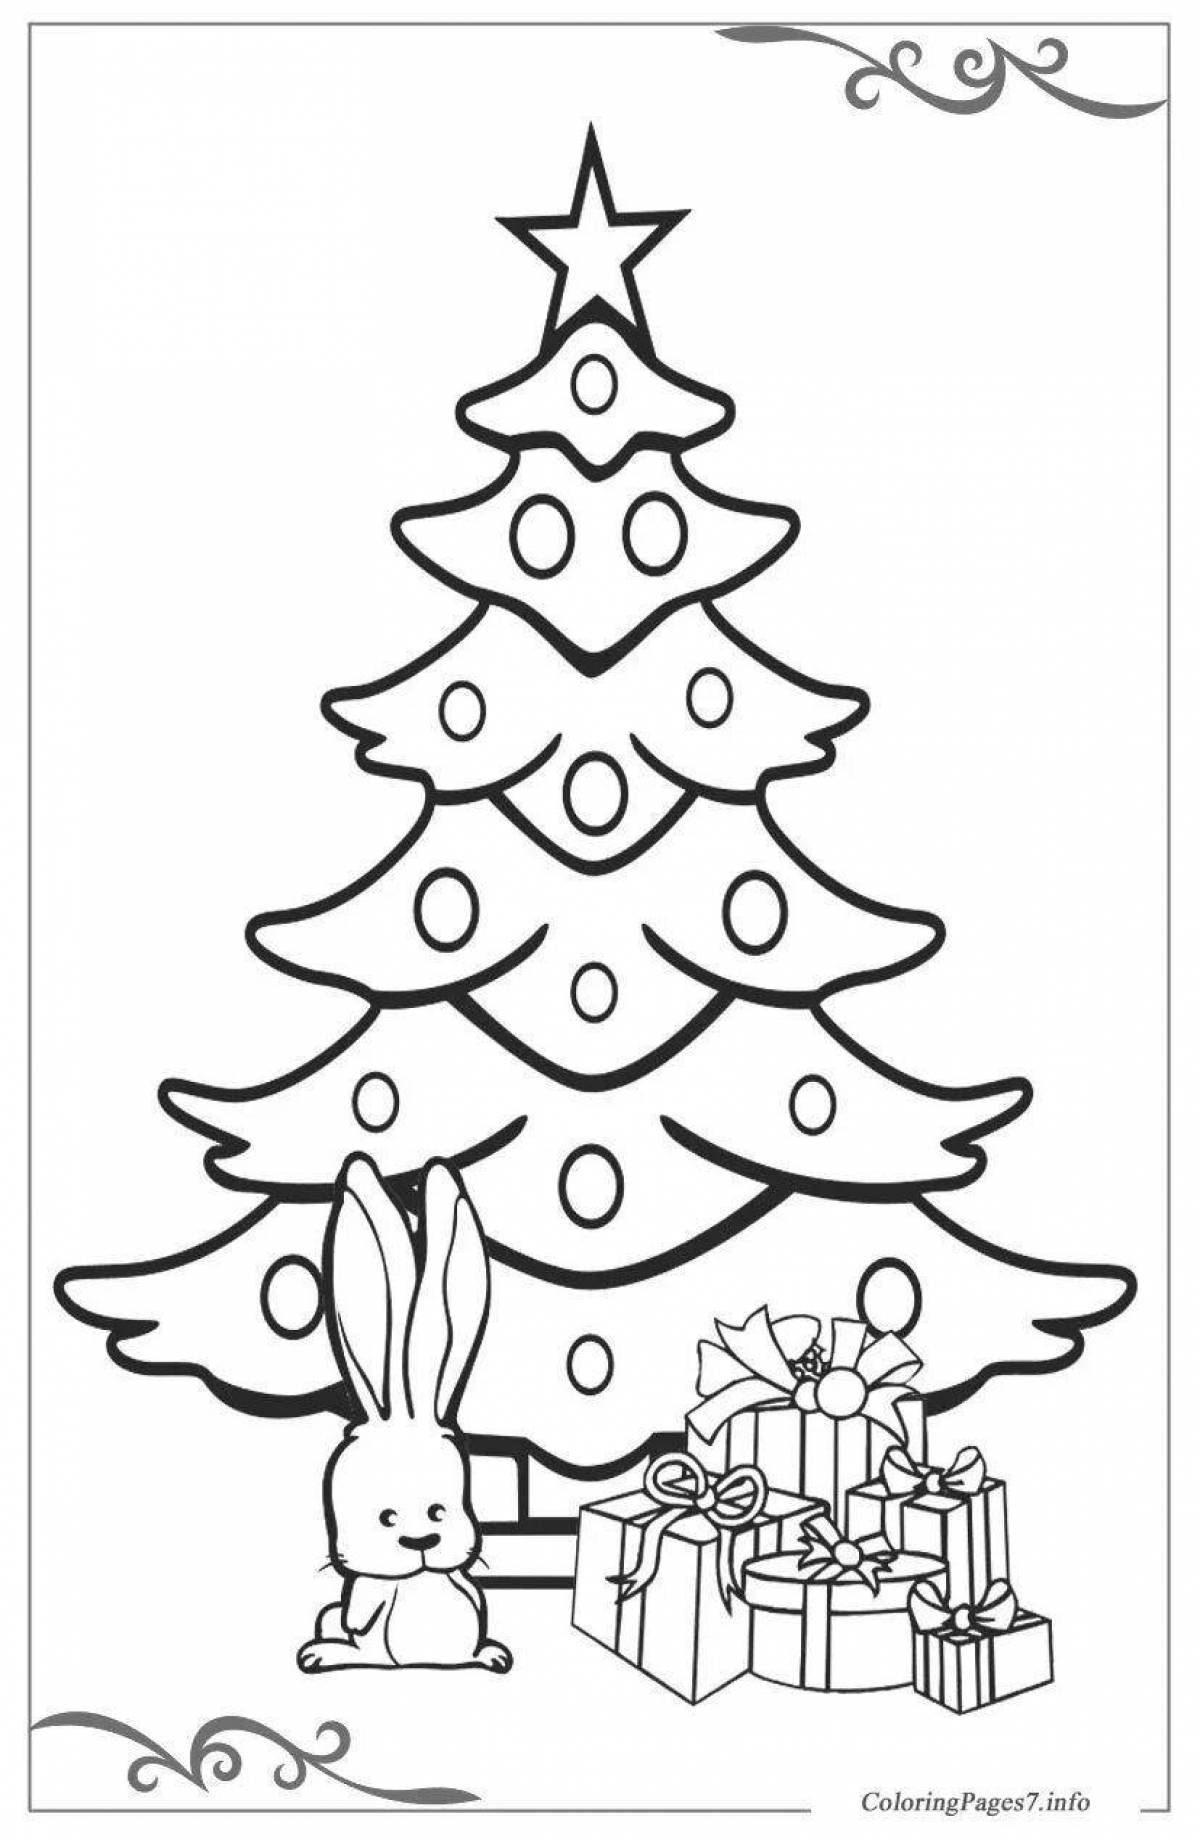 Christmas tree coloring book for children